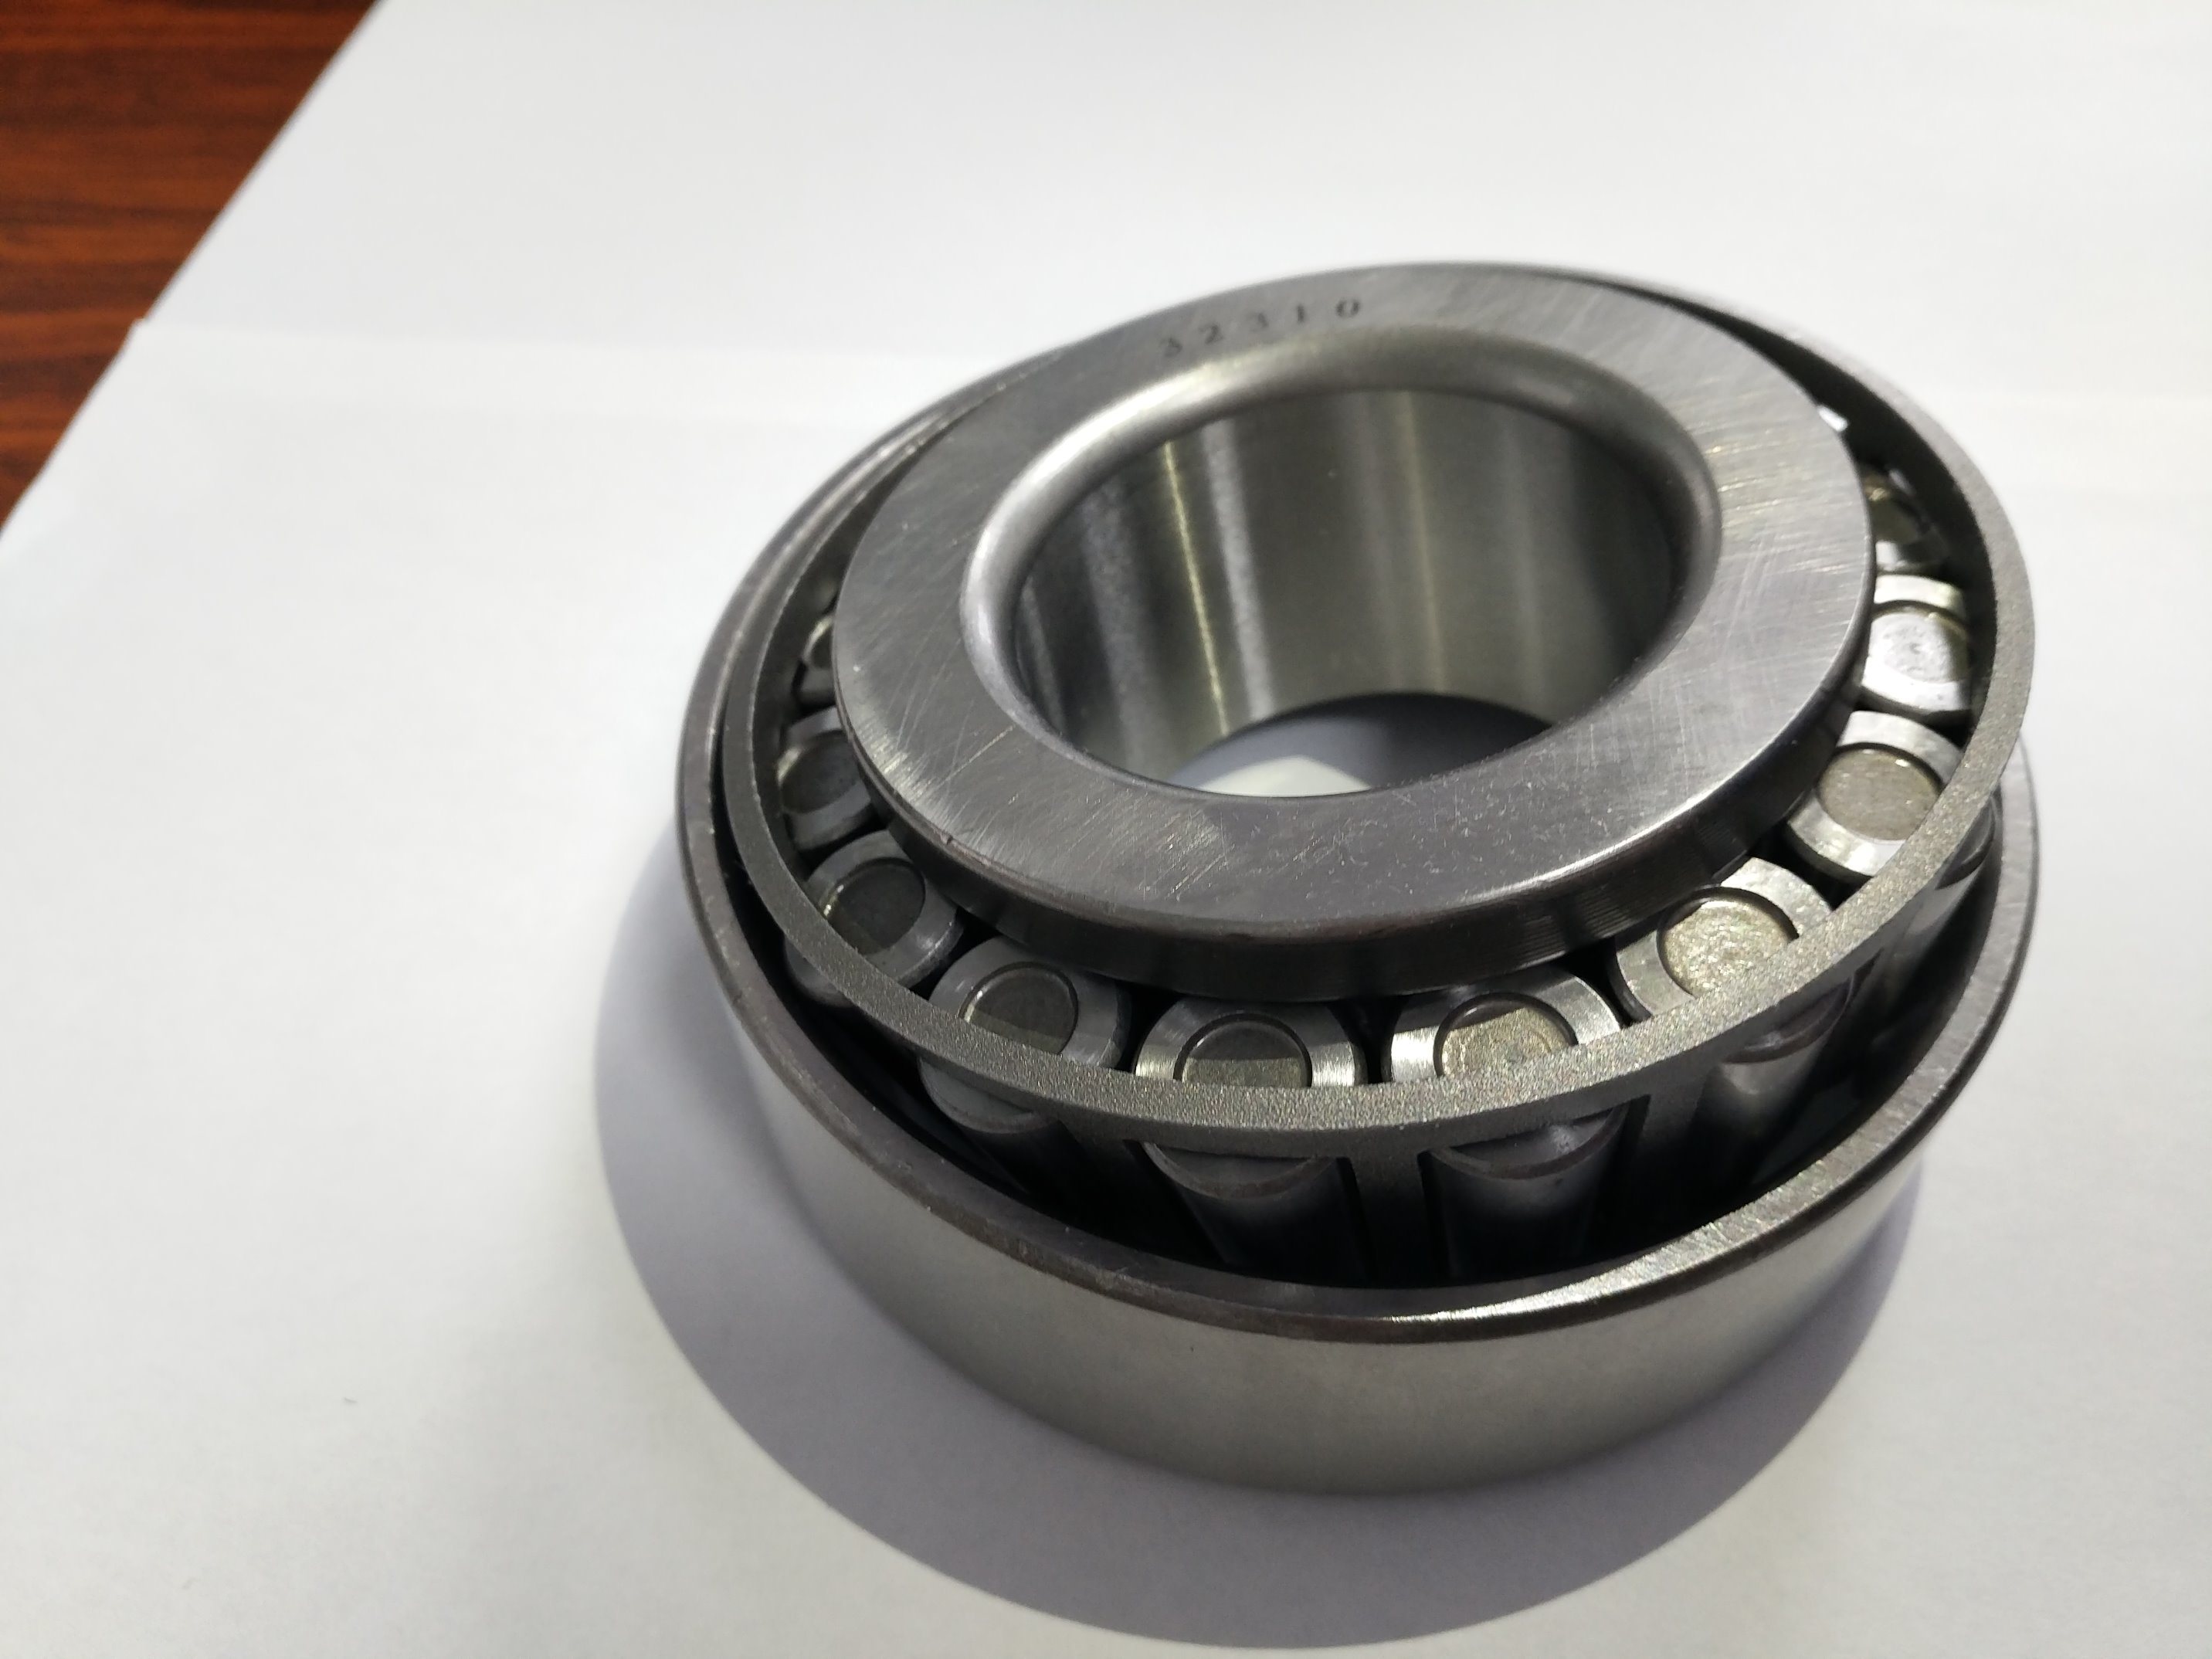 15126/250 Auto Parts, High Quality Bearing Manufacturer